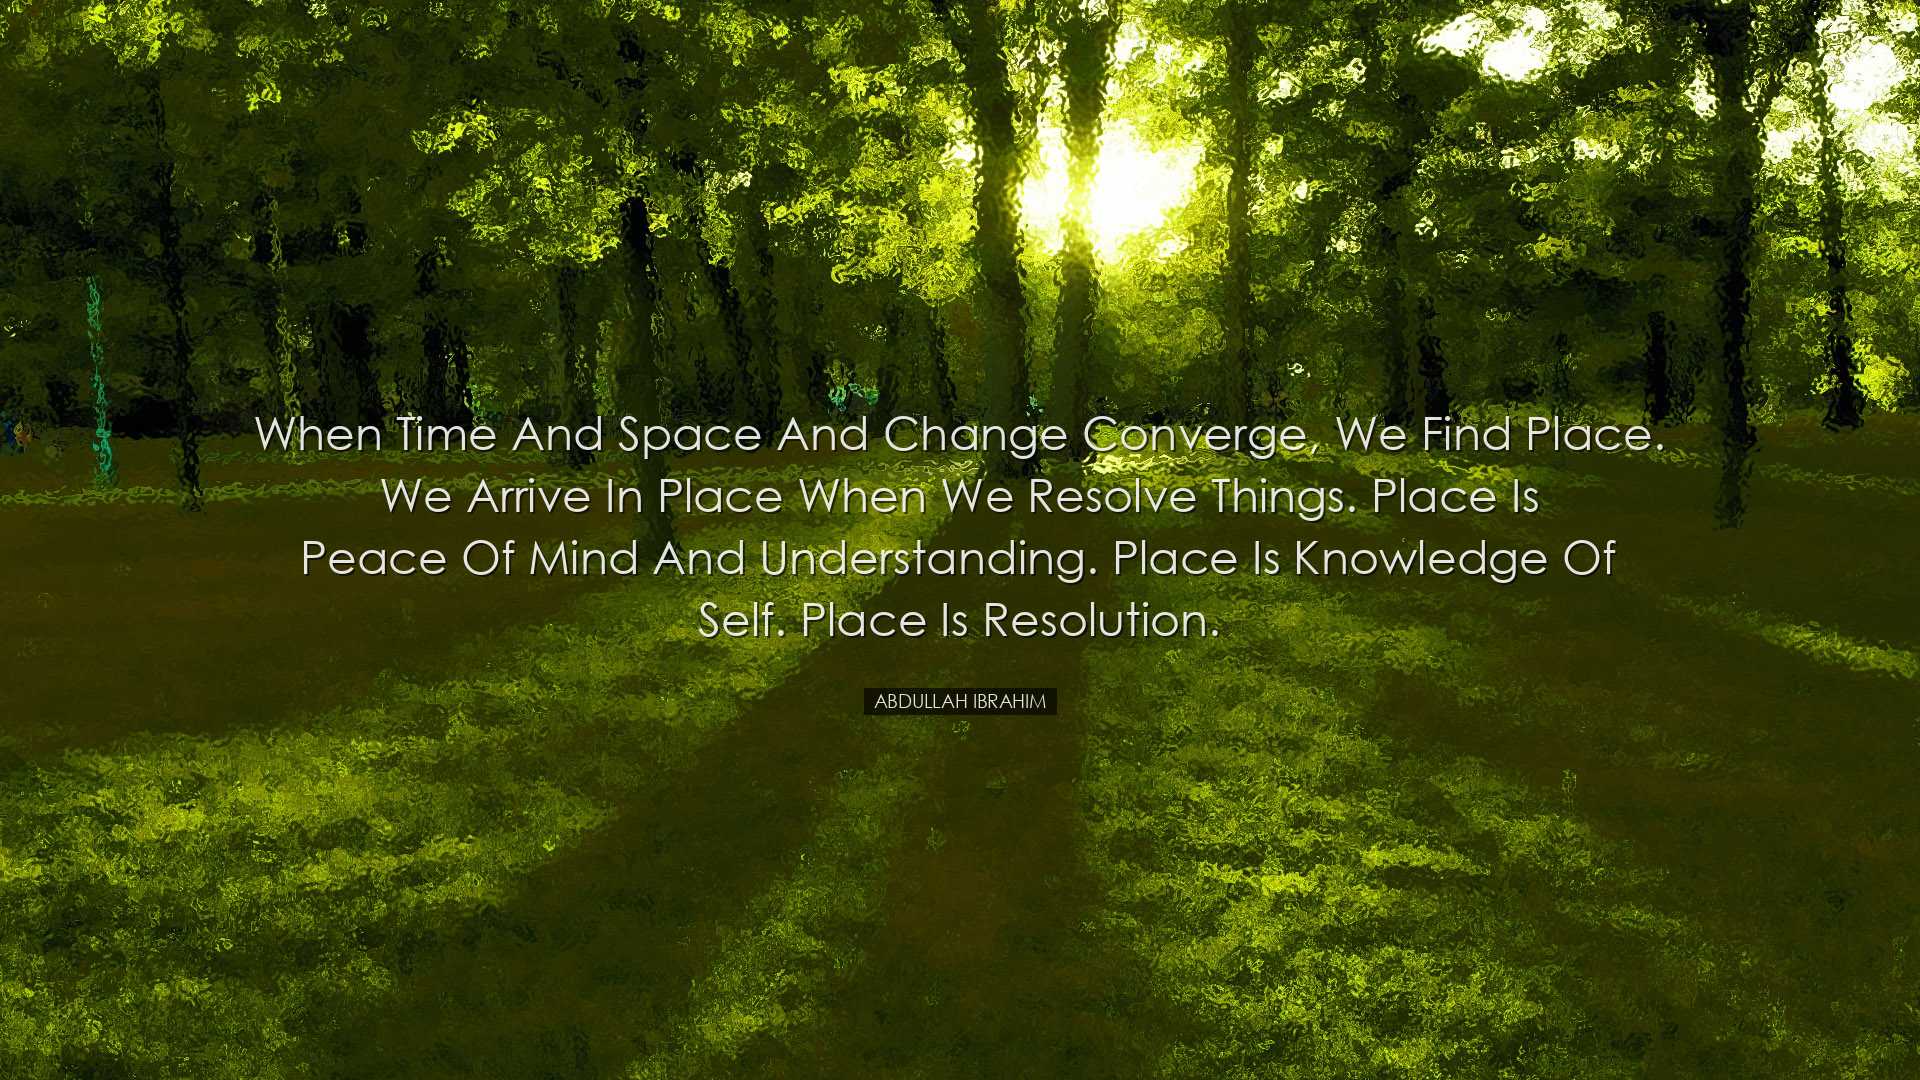 When time and space and change converge, we find place. We arrive